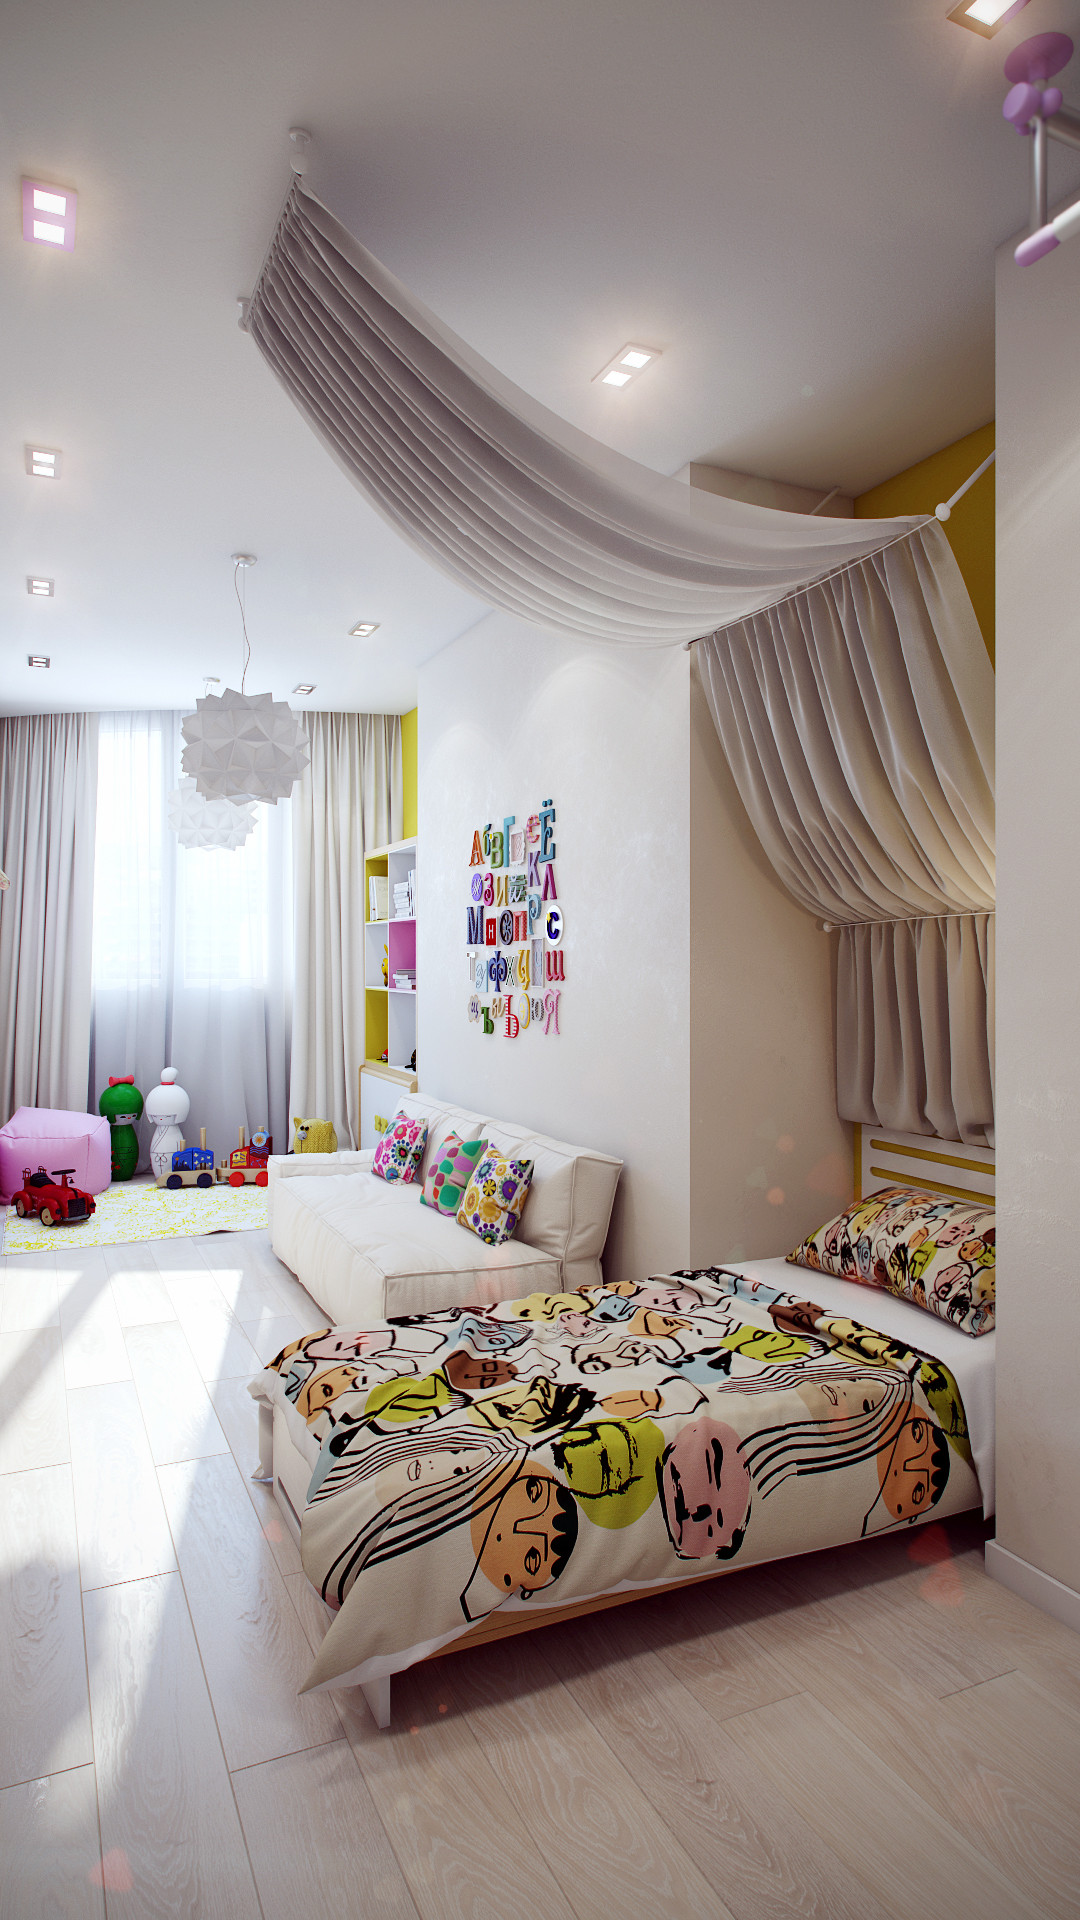 Bedroom For Girl
 Attractive Girls Bedroom Decorating Ideas With Beautiful